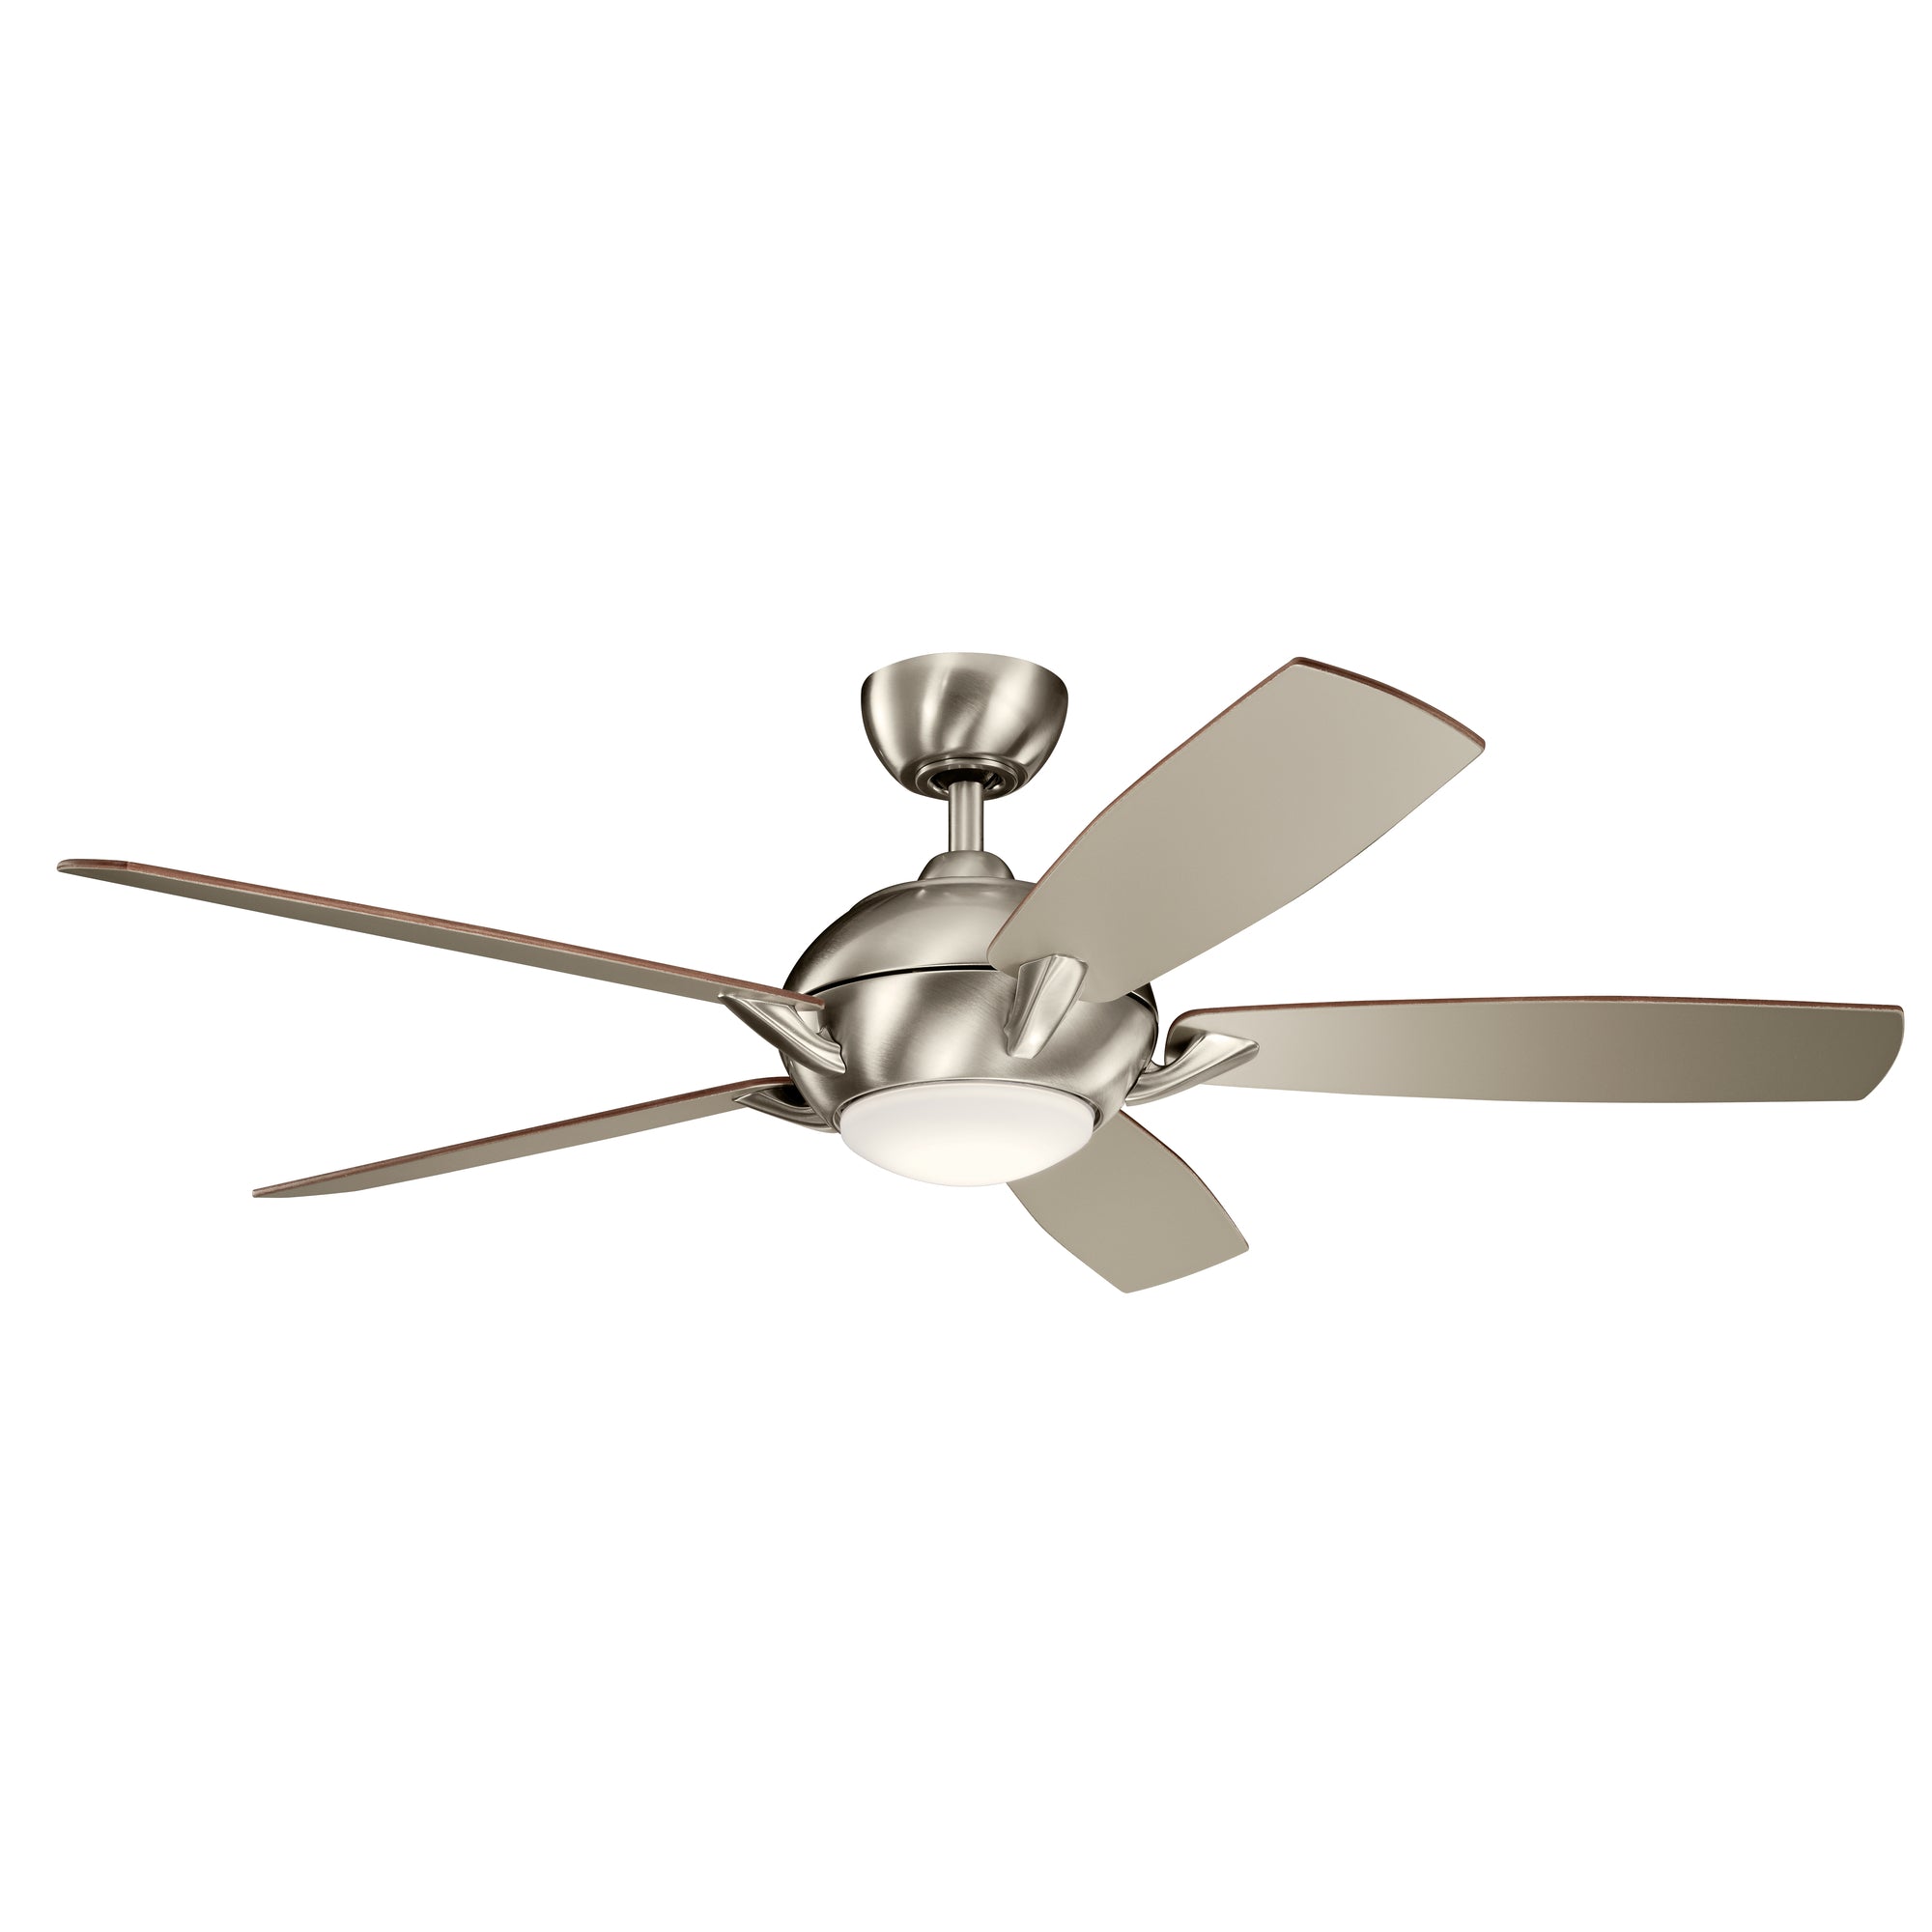 GENO Ceiling fan Stainless steel INTEGRATED LED - 330001BSS | KICHLER